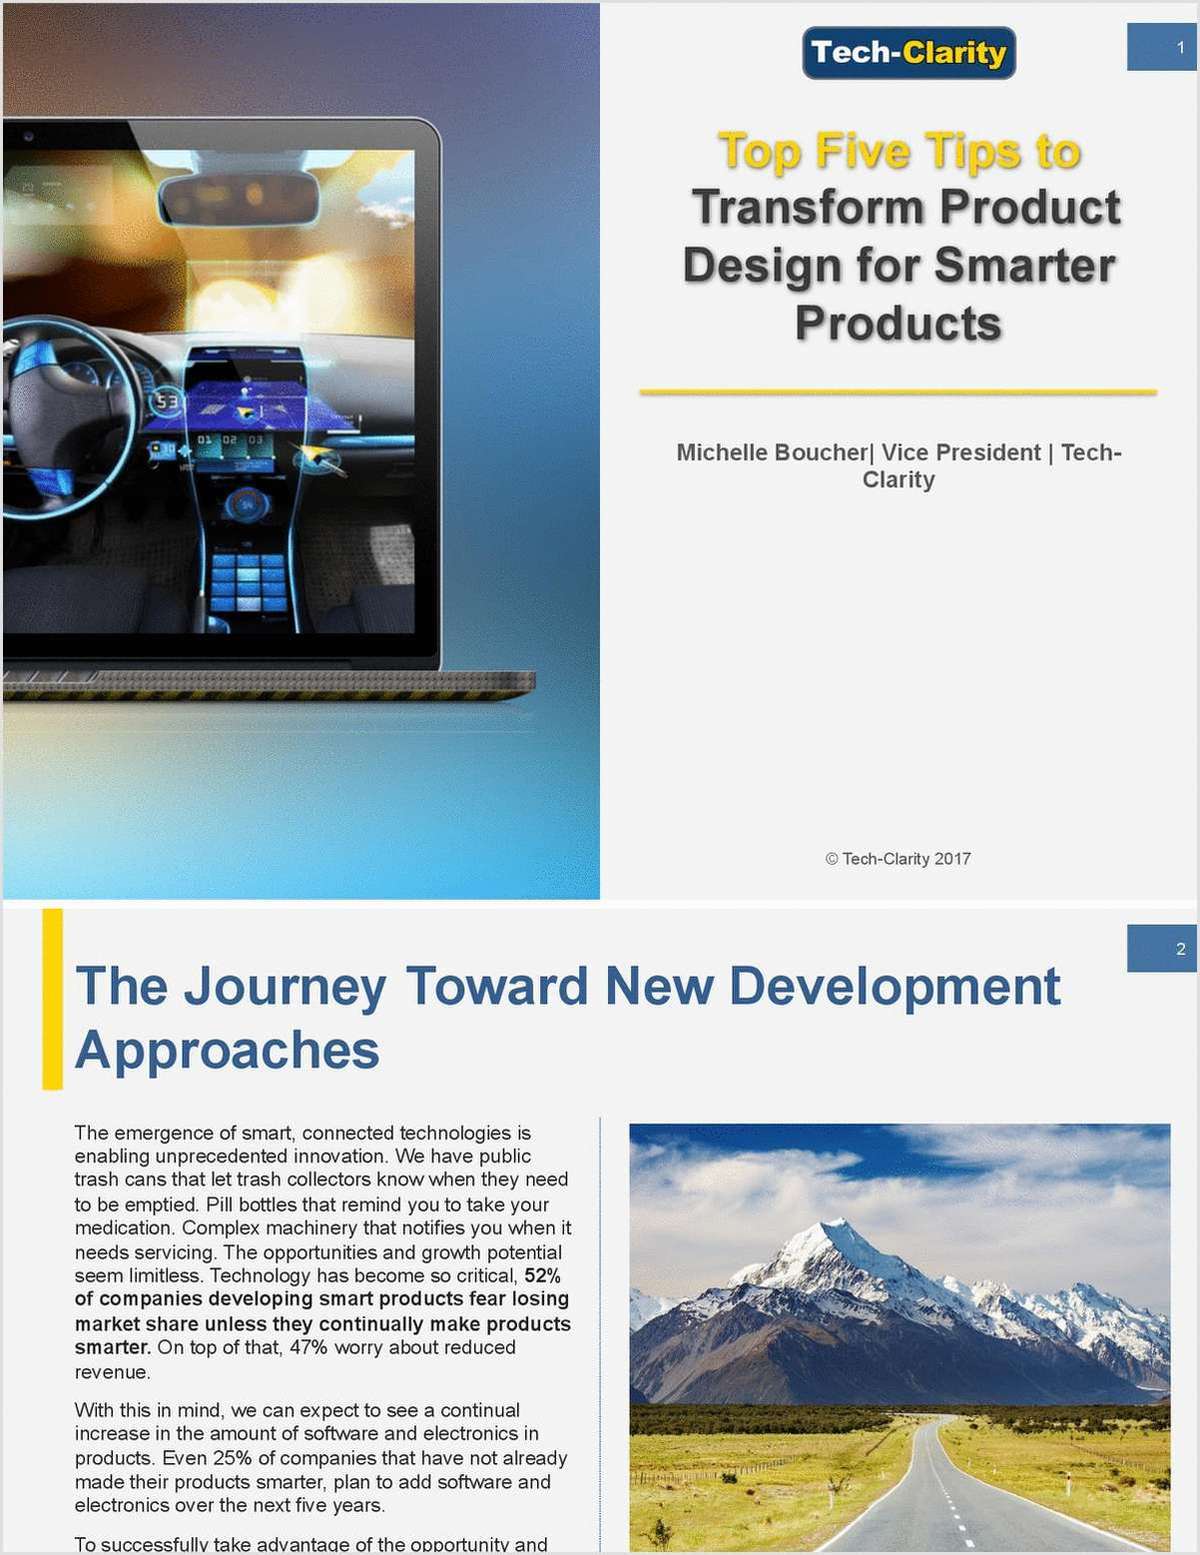 Transform Product Design and Create Smarter Products